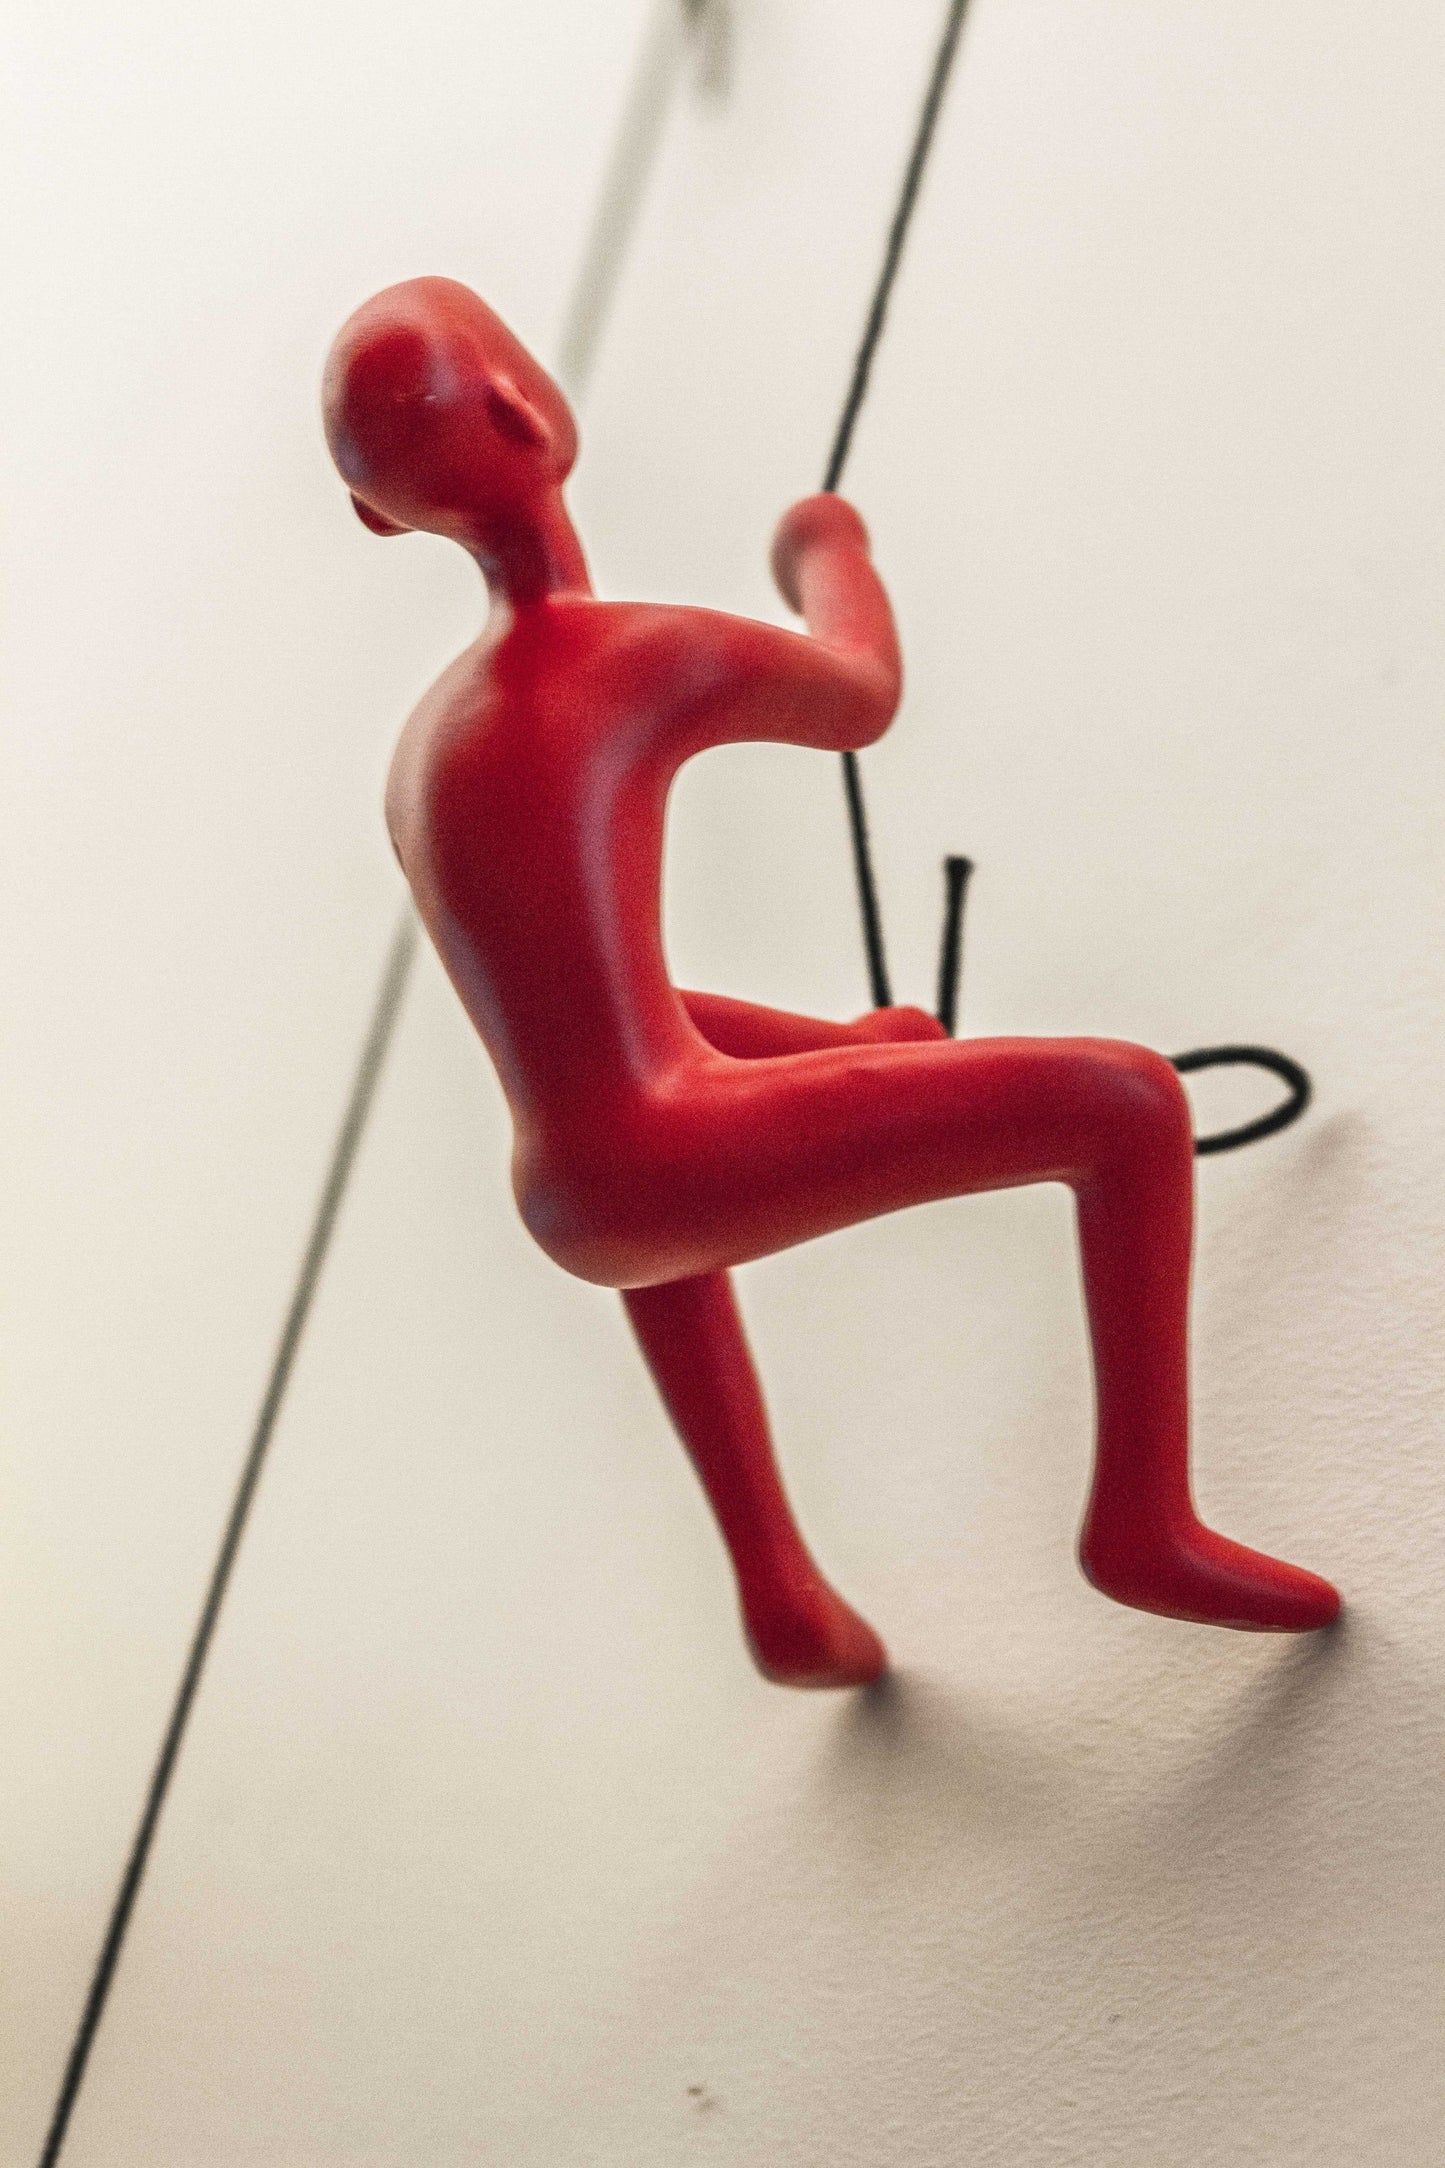 6" Red Unique Climbing Man With Rope Wall Art